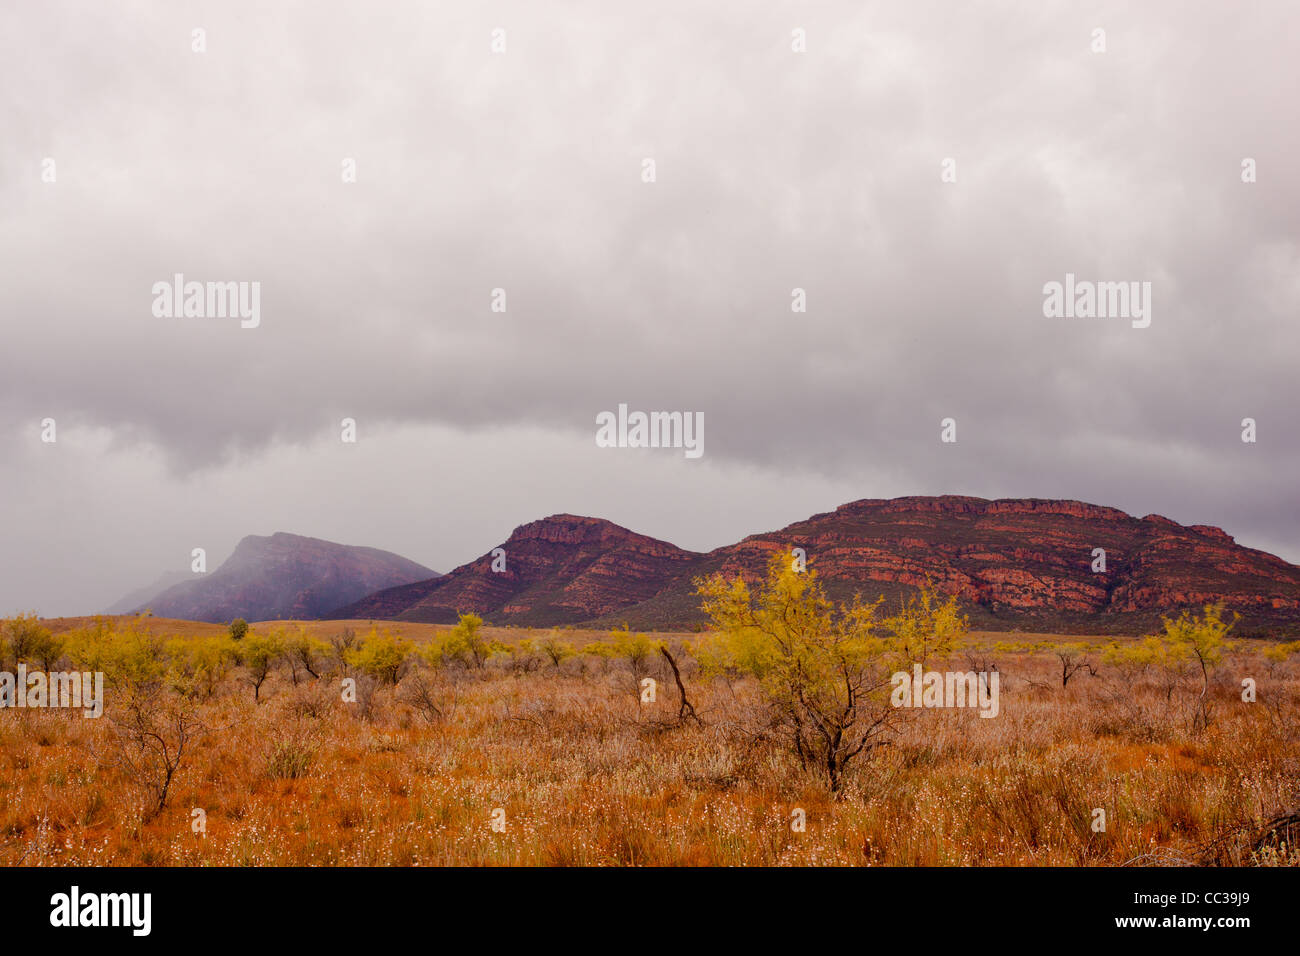 Storm clouds over Mount Ohlssen Bagge at Wilpena Pound in the Flinders Ranges in outback South Australia, Australia Stock Photo